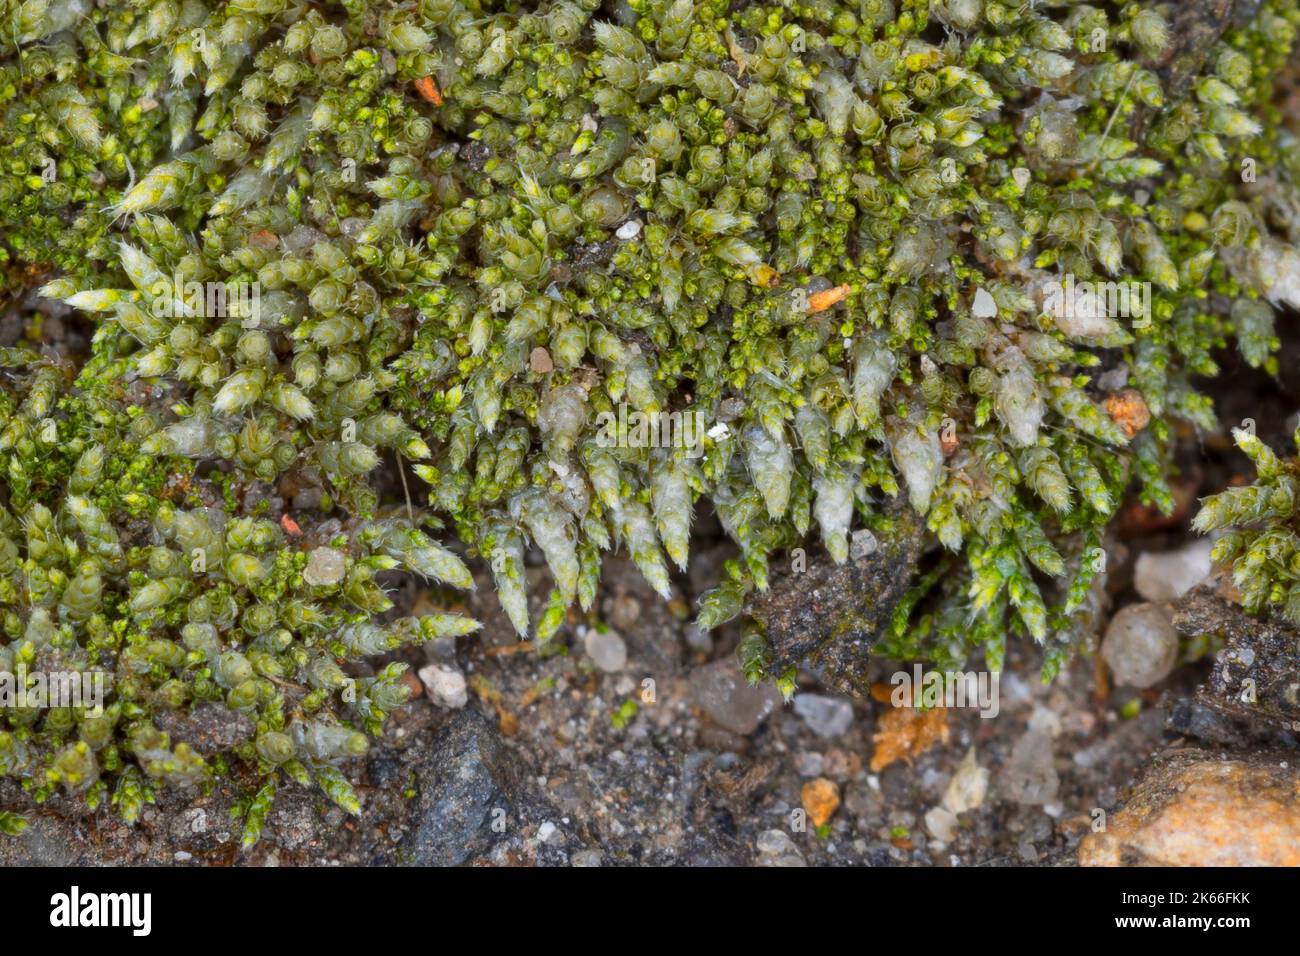 silvergreen bryum moss, silvery thread moss (Bryum argenteum), growing in the gaps concrete coping slabs, Germany Stock Photo